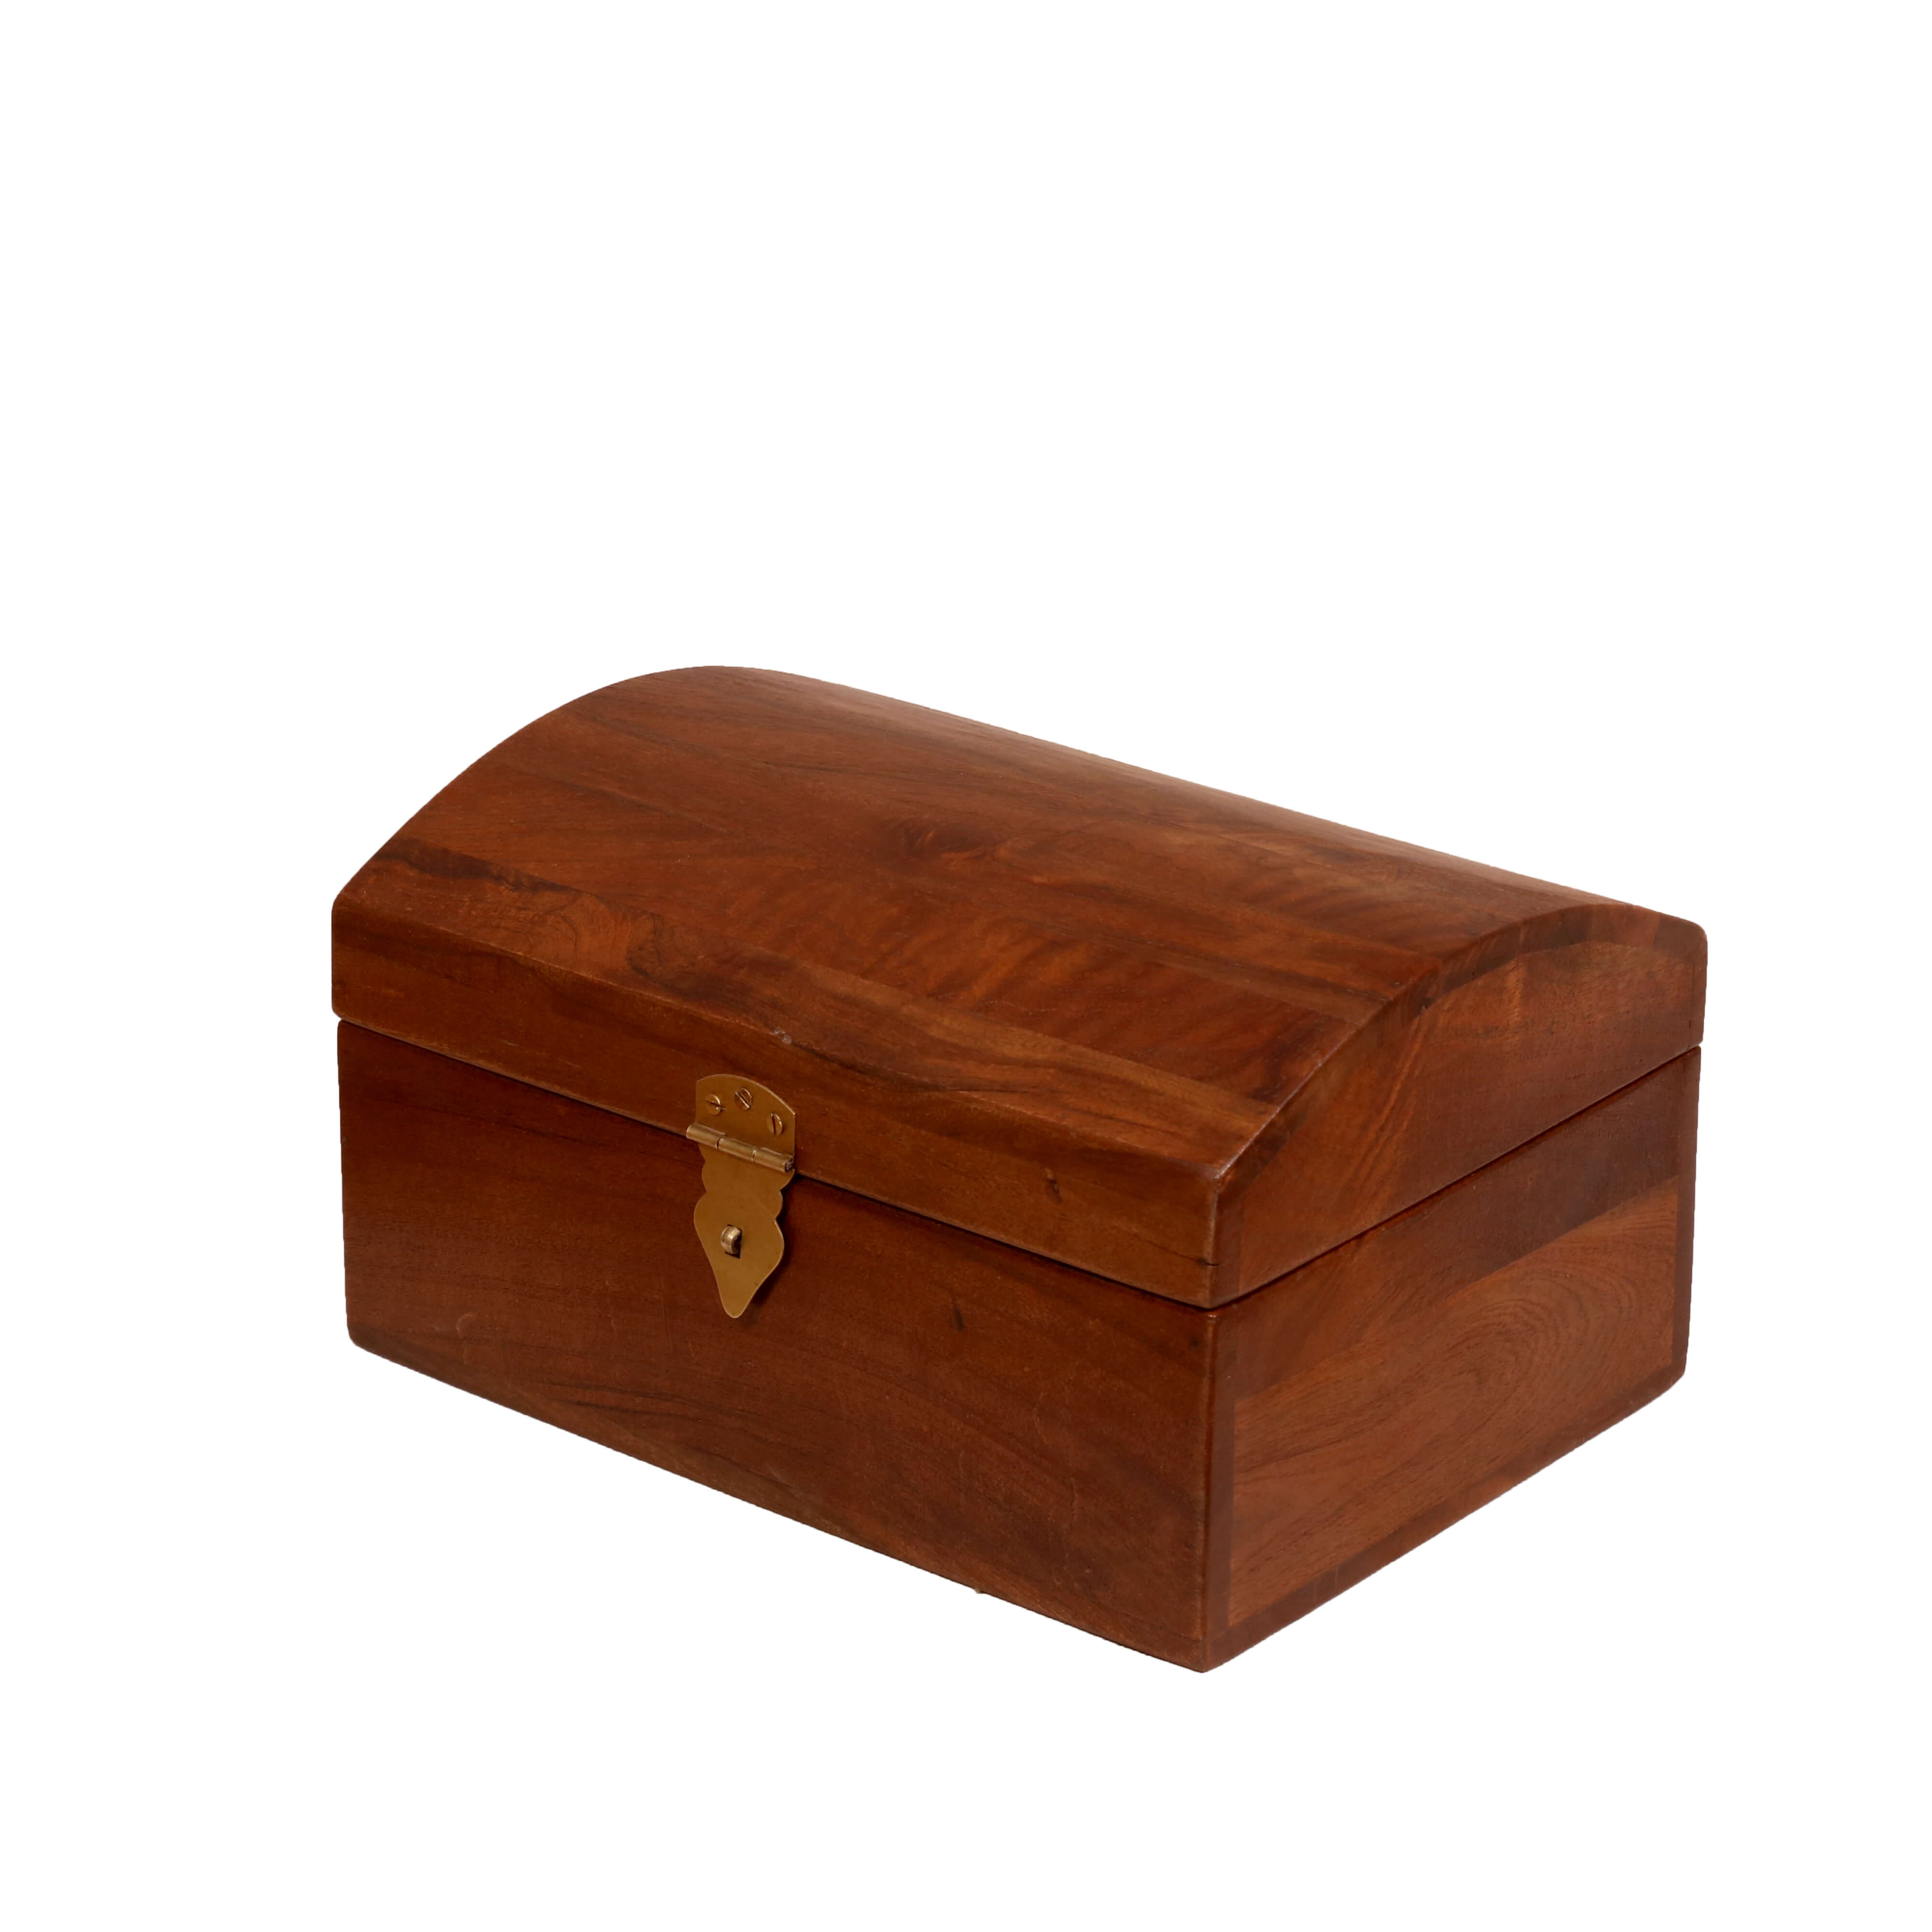 Wooden Arched Box Wooden Box